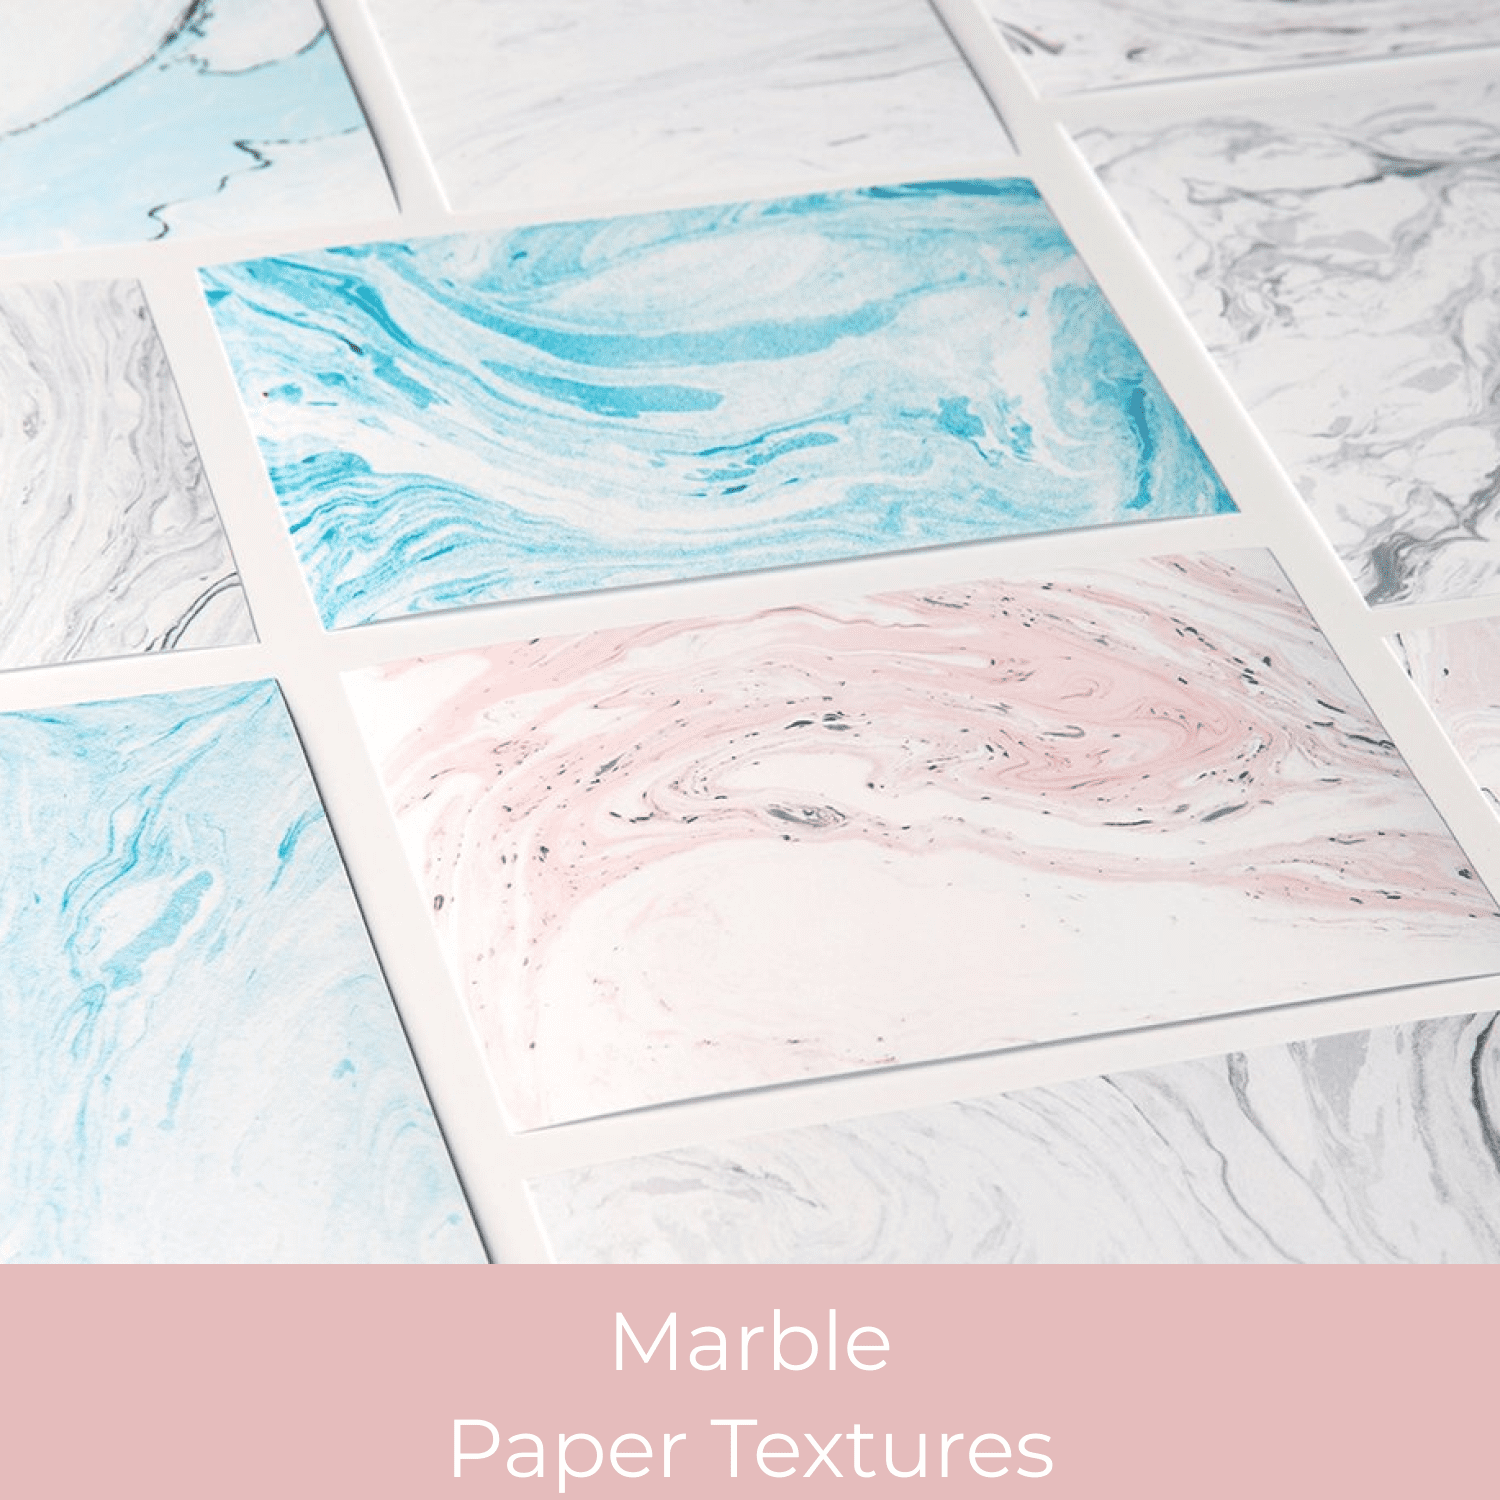 Marble Paper Textures.